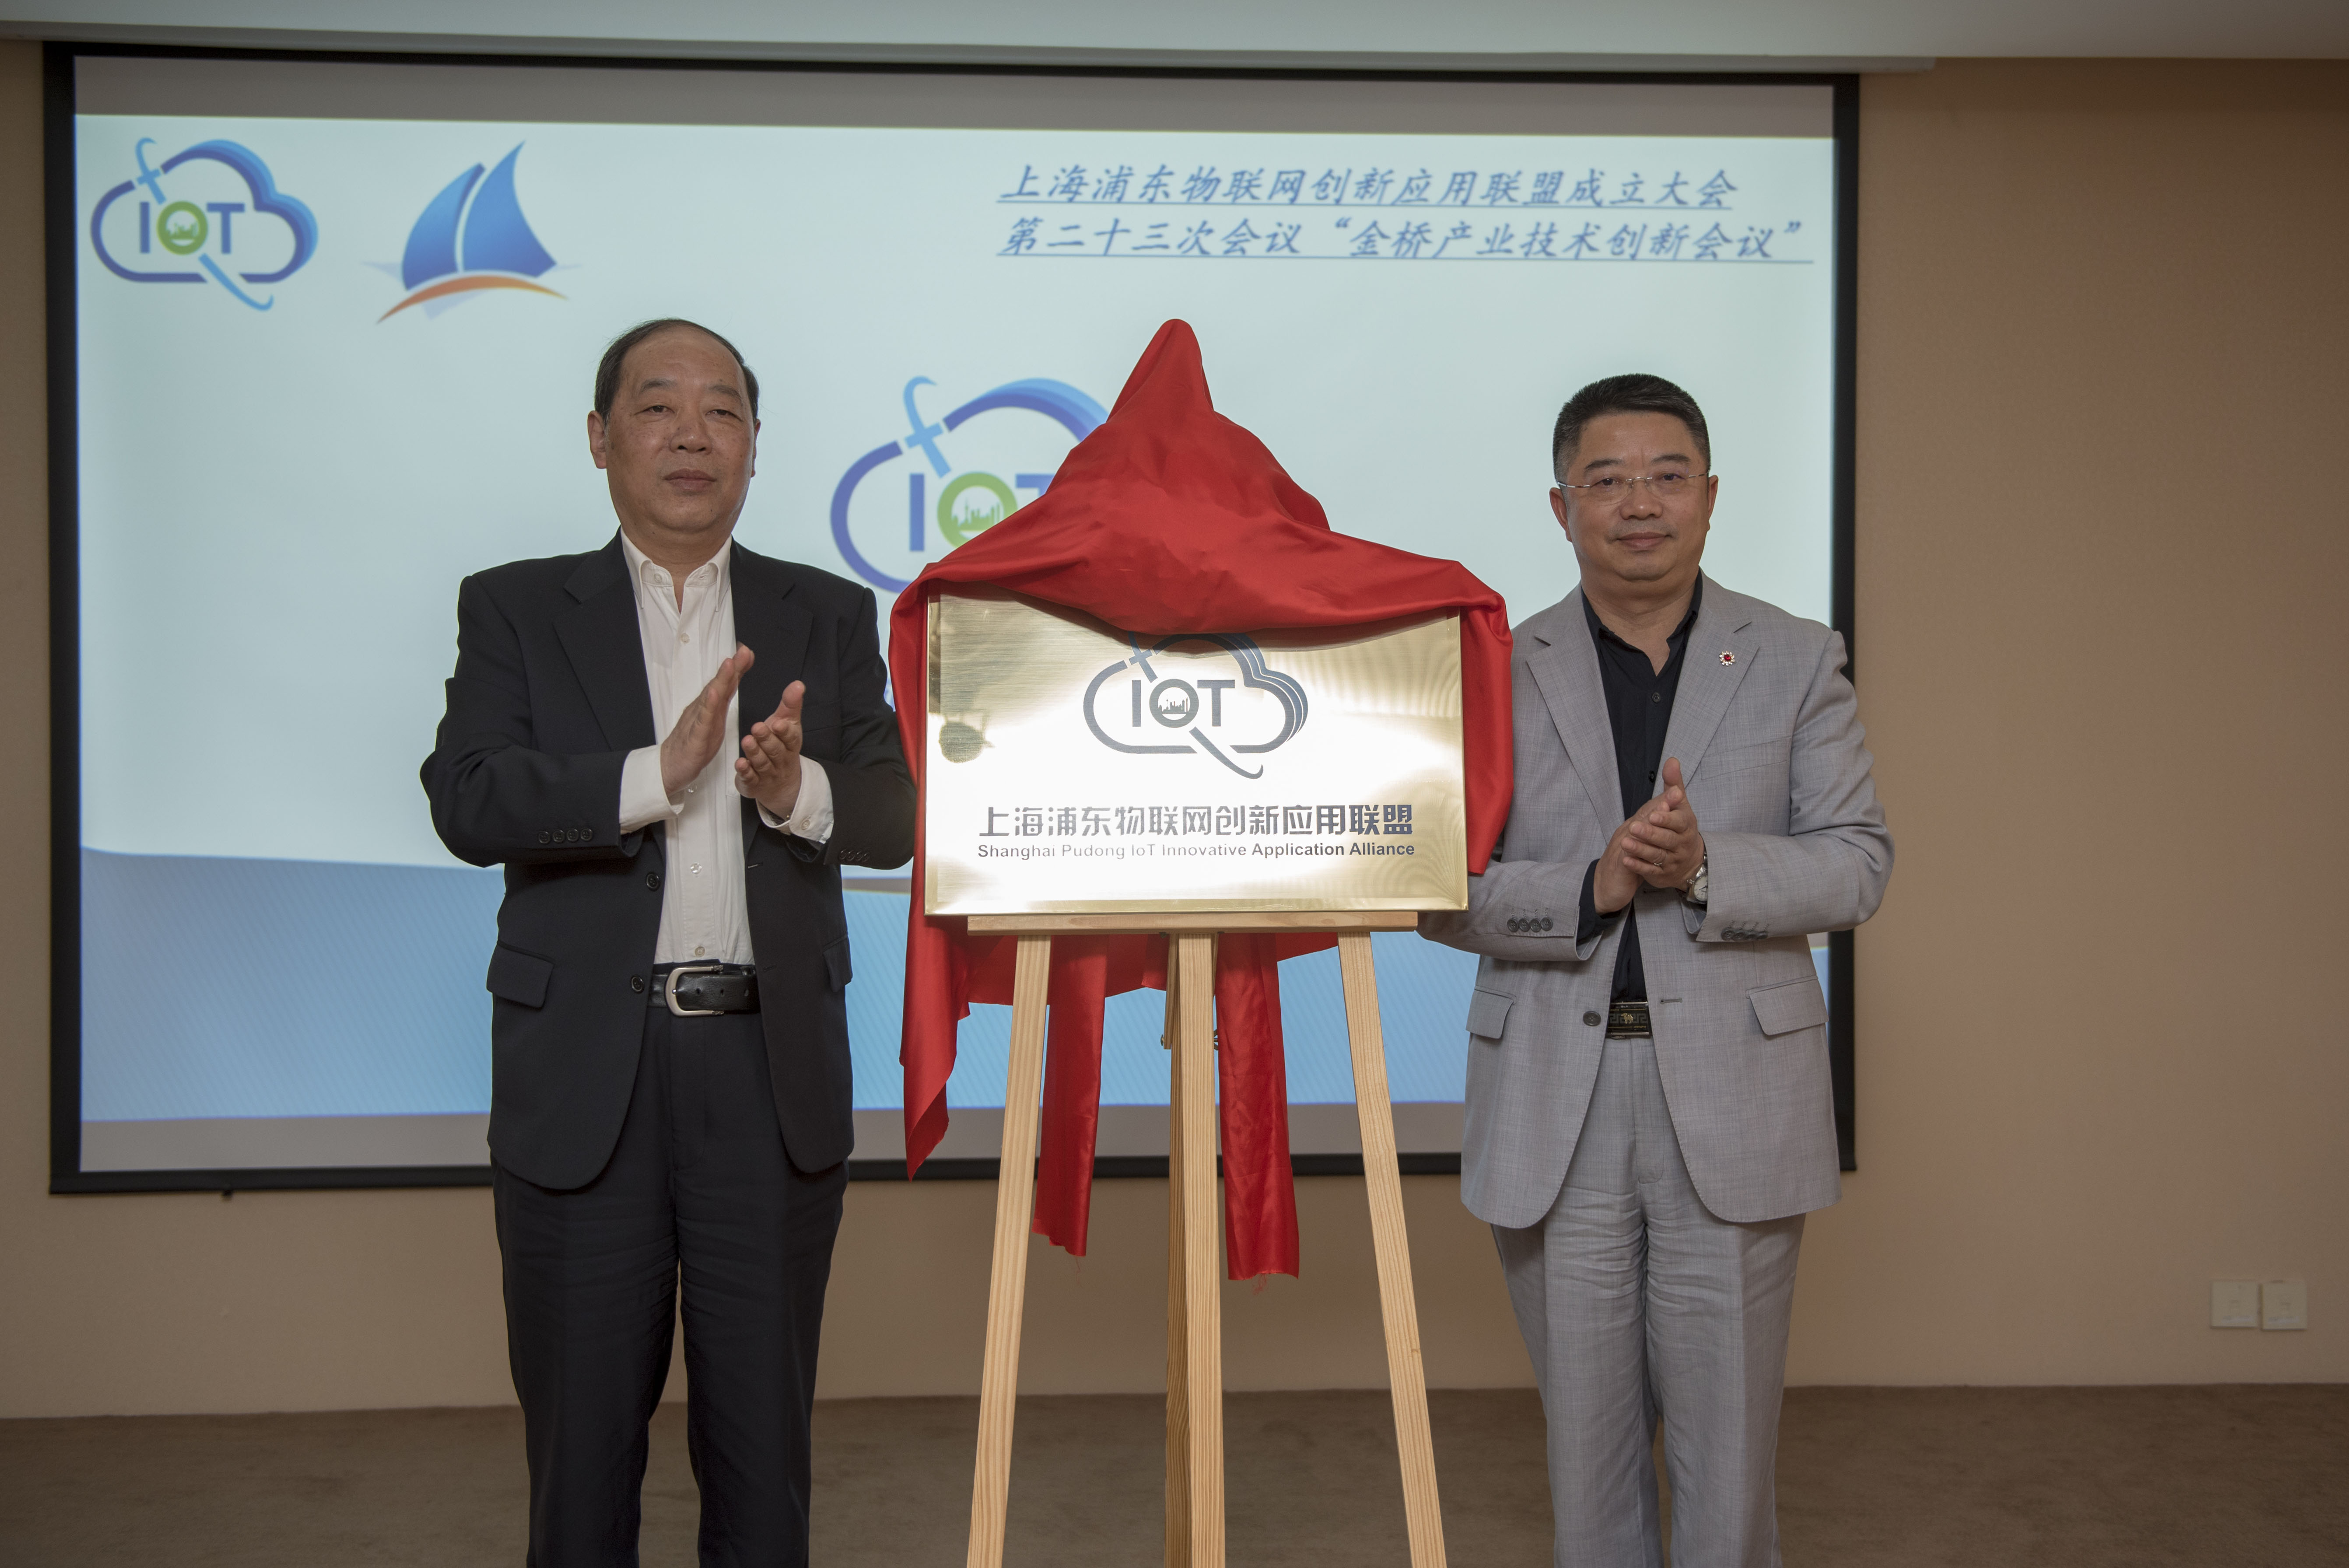 Shanghai Pudong IoT Innovation and Application Alliance Established